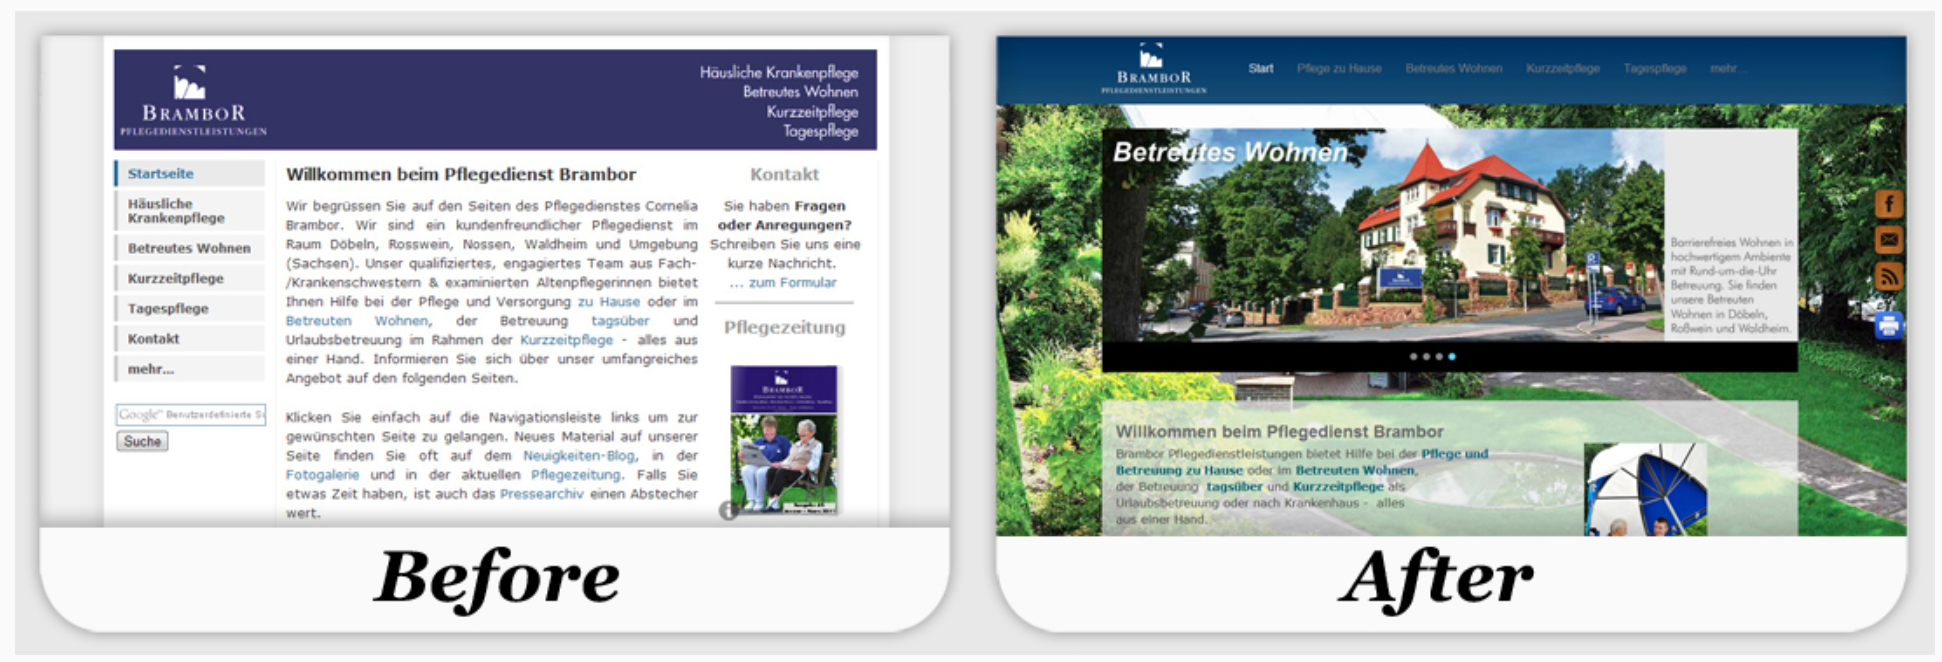 Images of a site's homepage before and after redesigning and publishing.